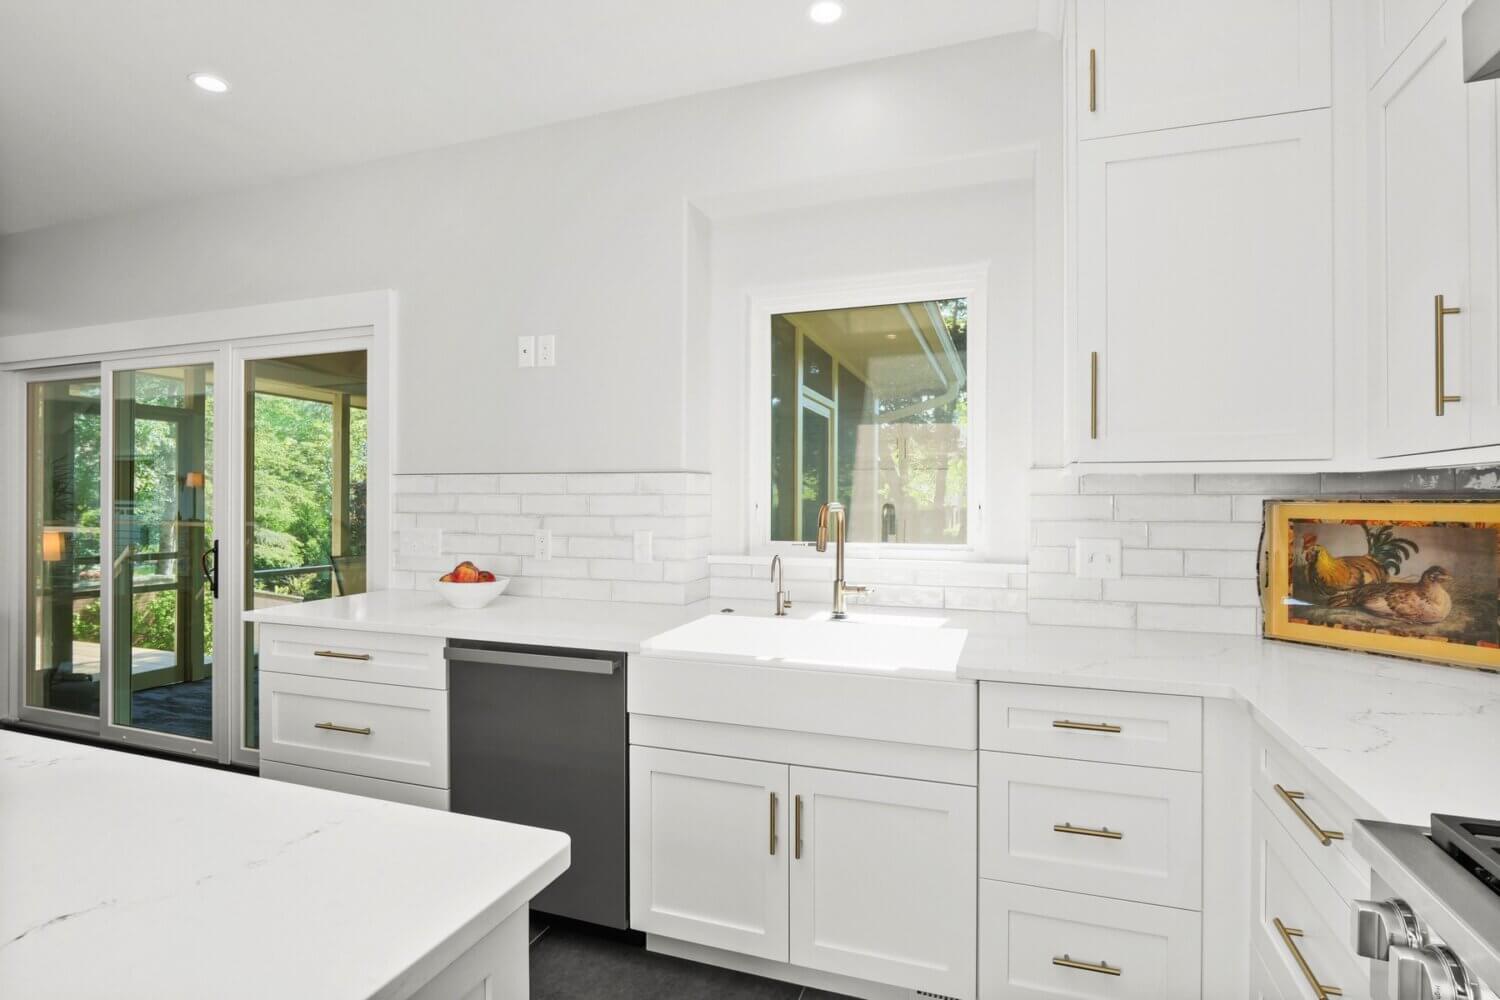 This all white kitchen uses pure white for the flat panel door cabinets, the apron sink, subway tile backsplash, countertops, etc.